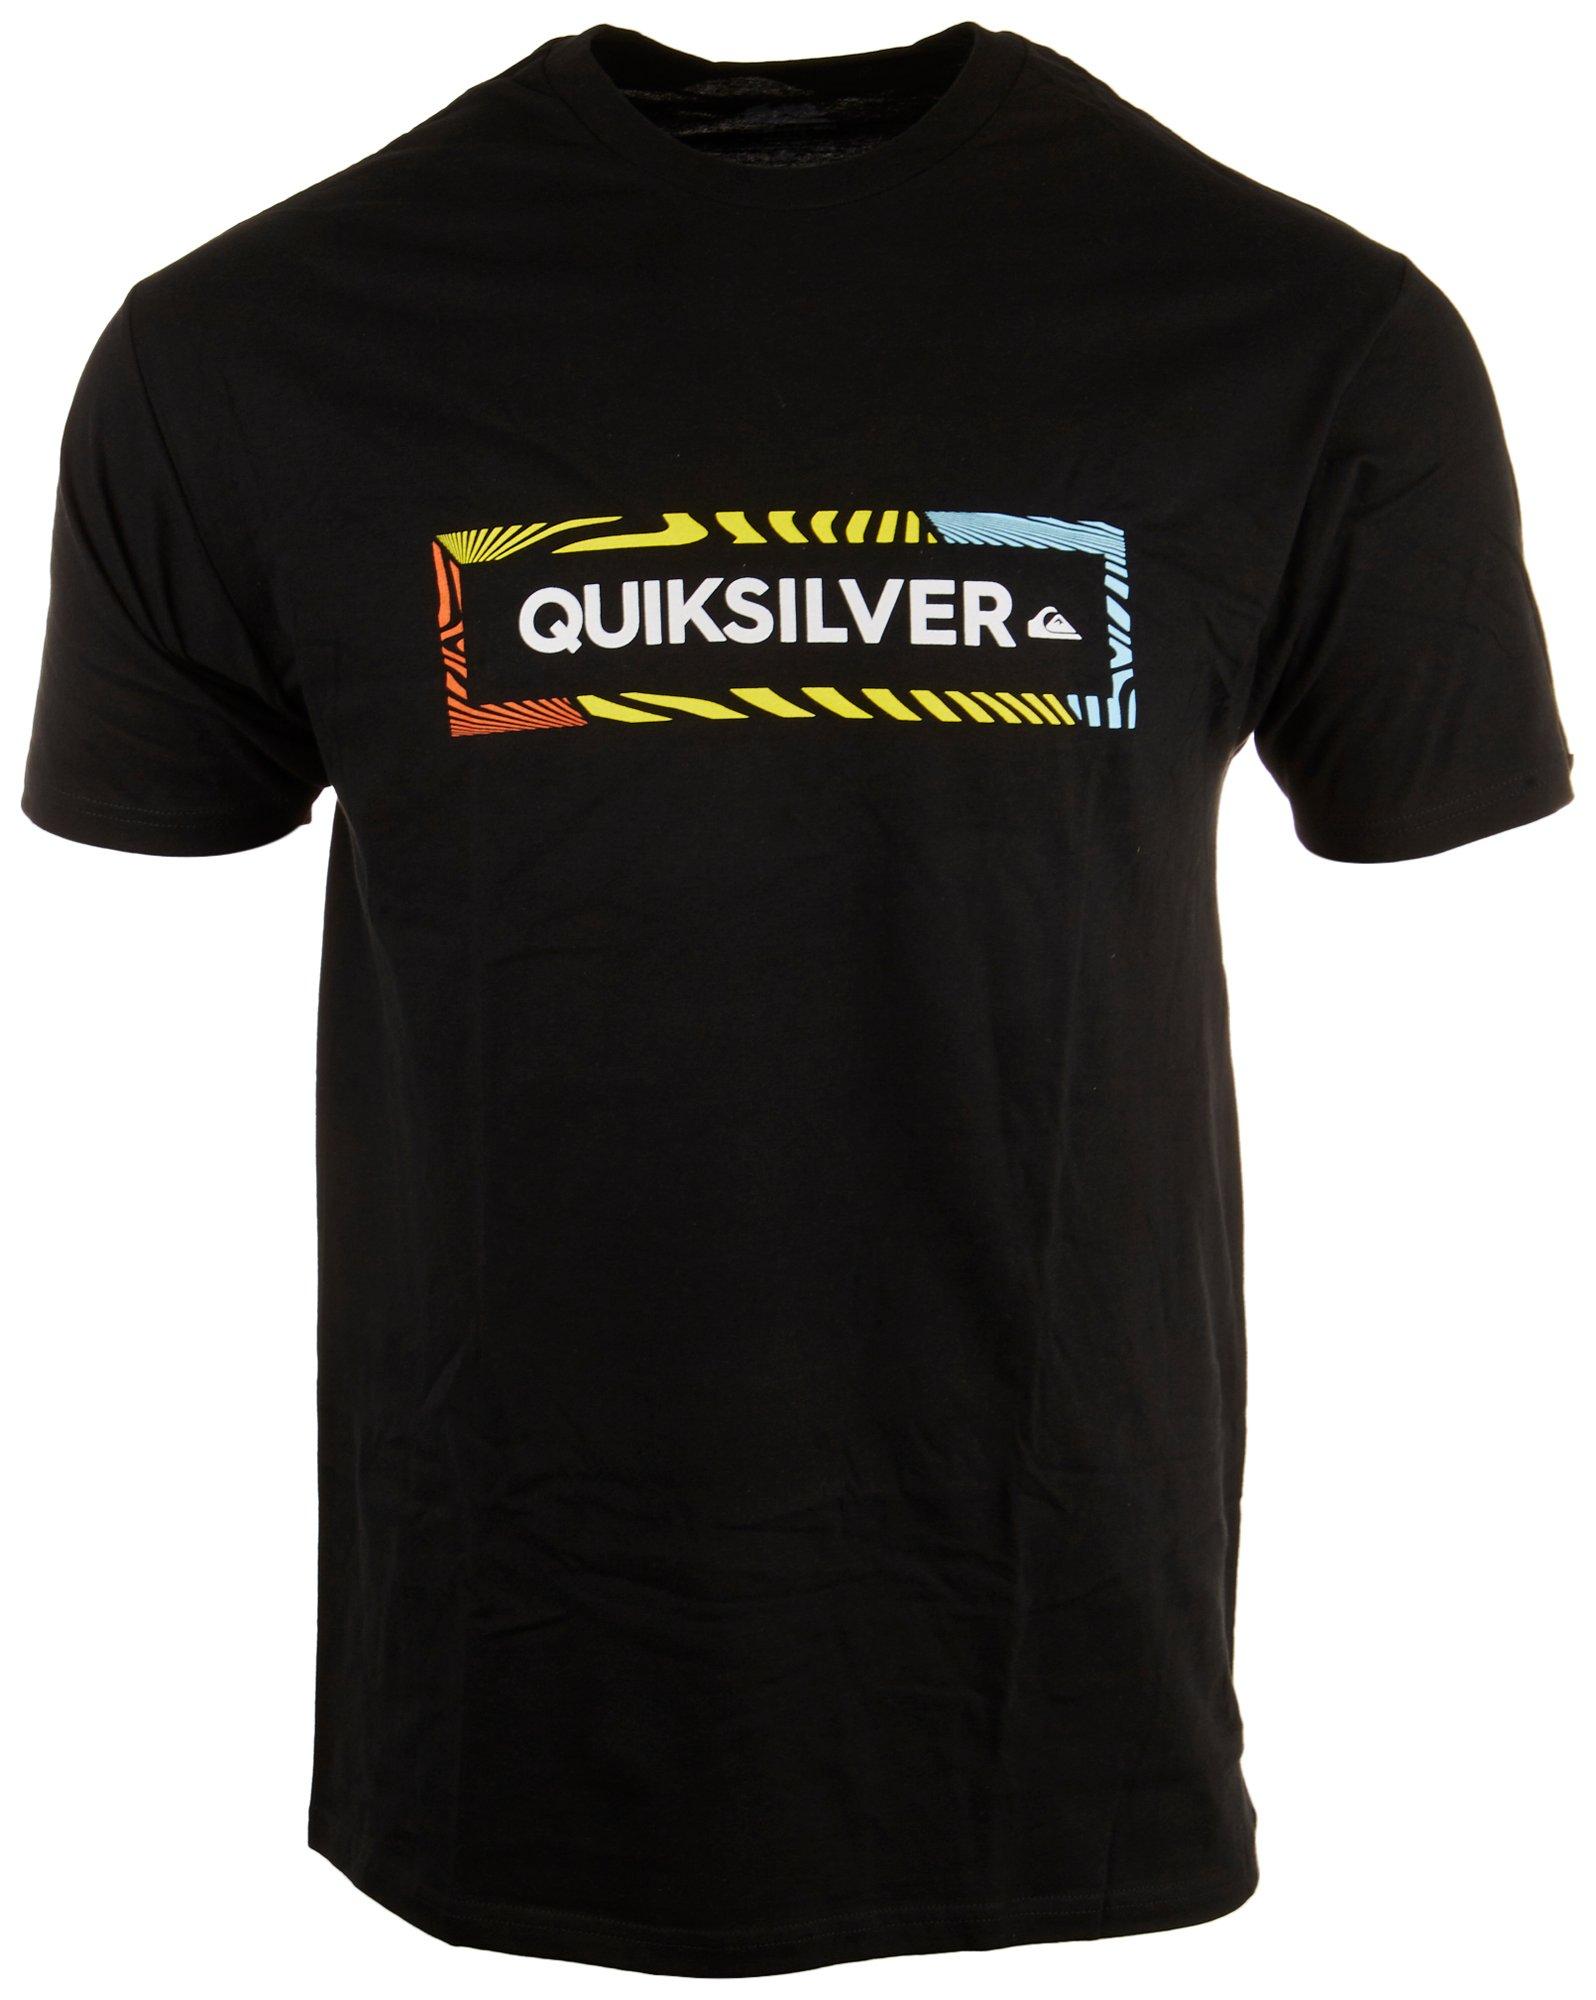 Quiksilver Mens Wise And Vise Short Sleeve Tee